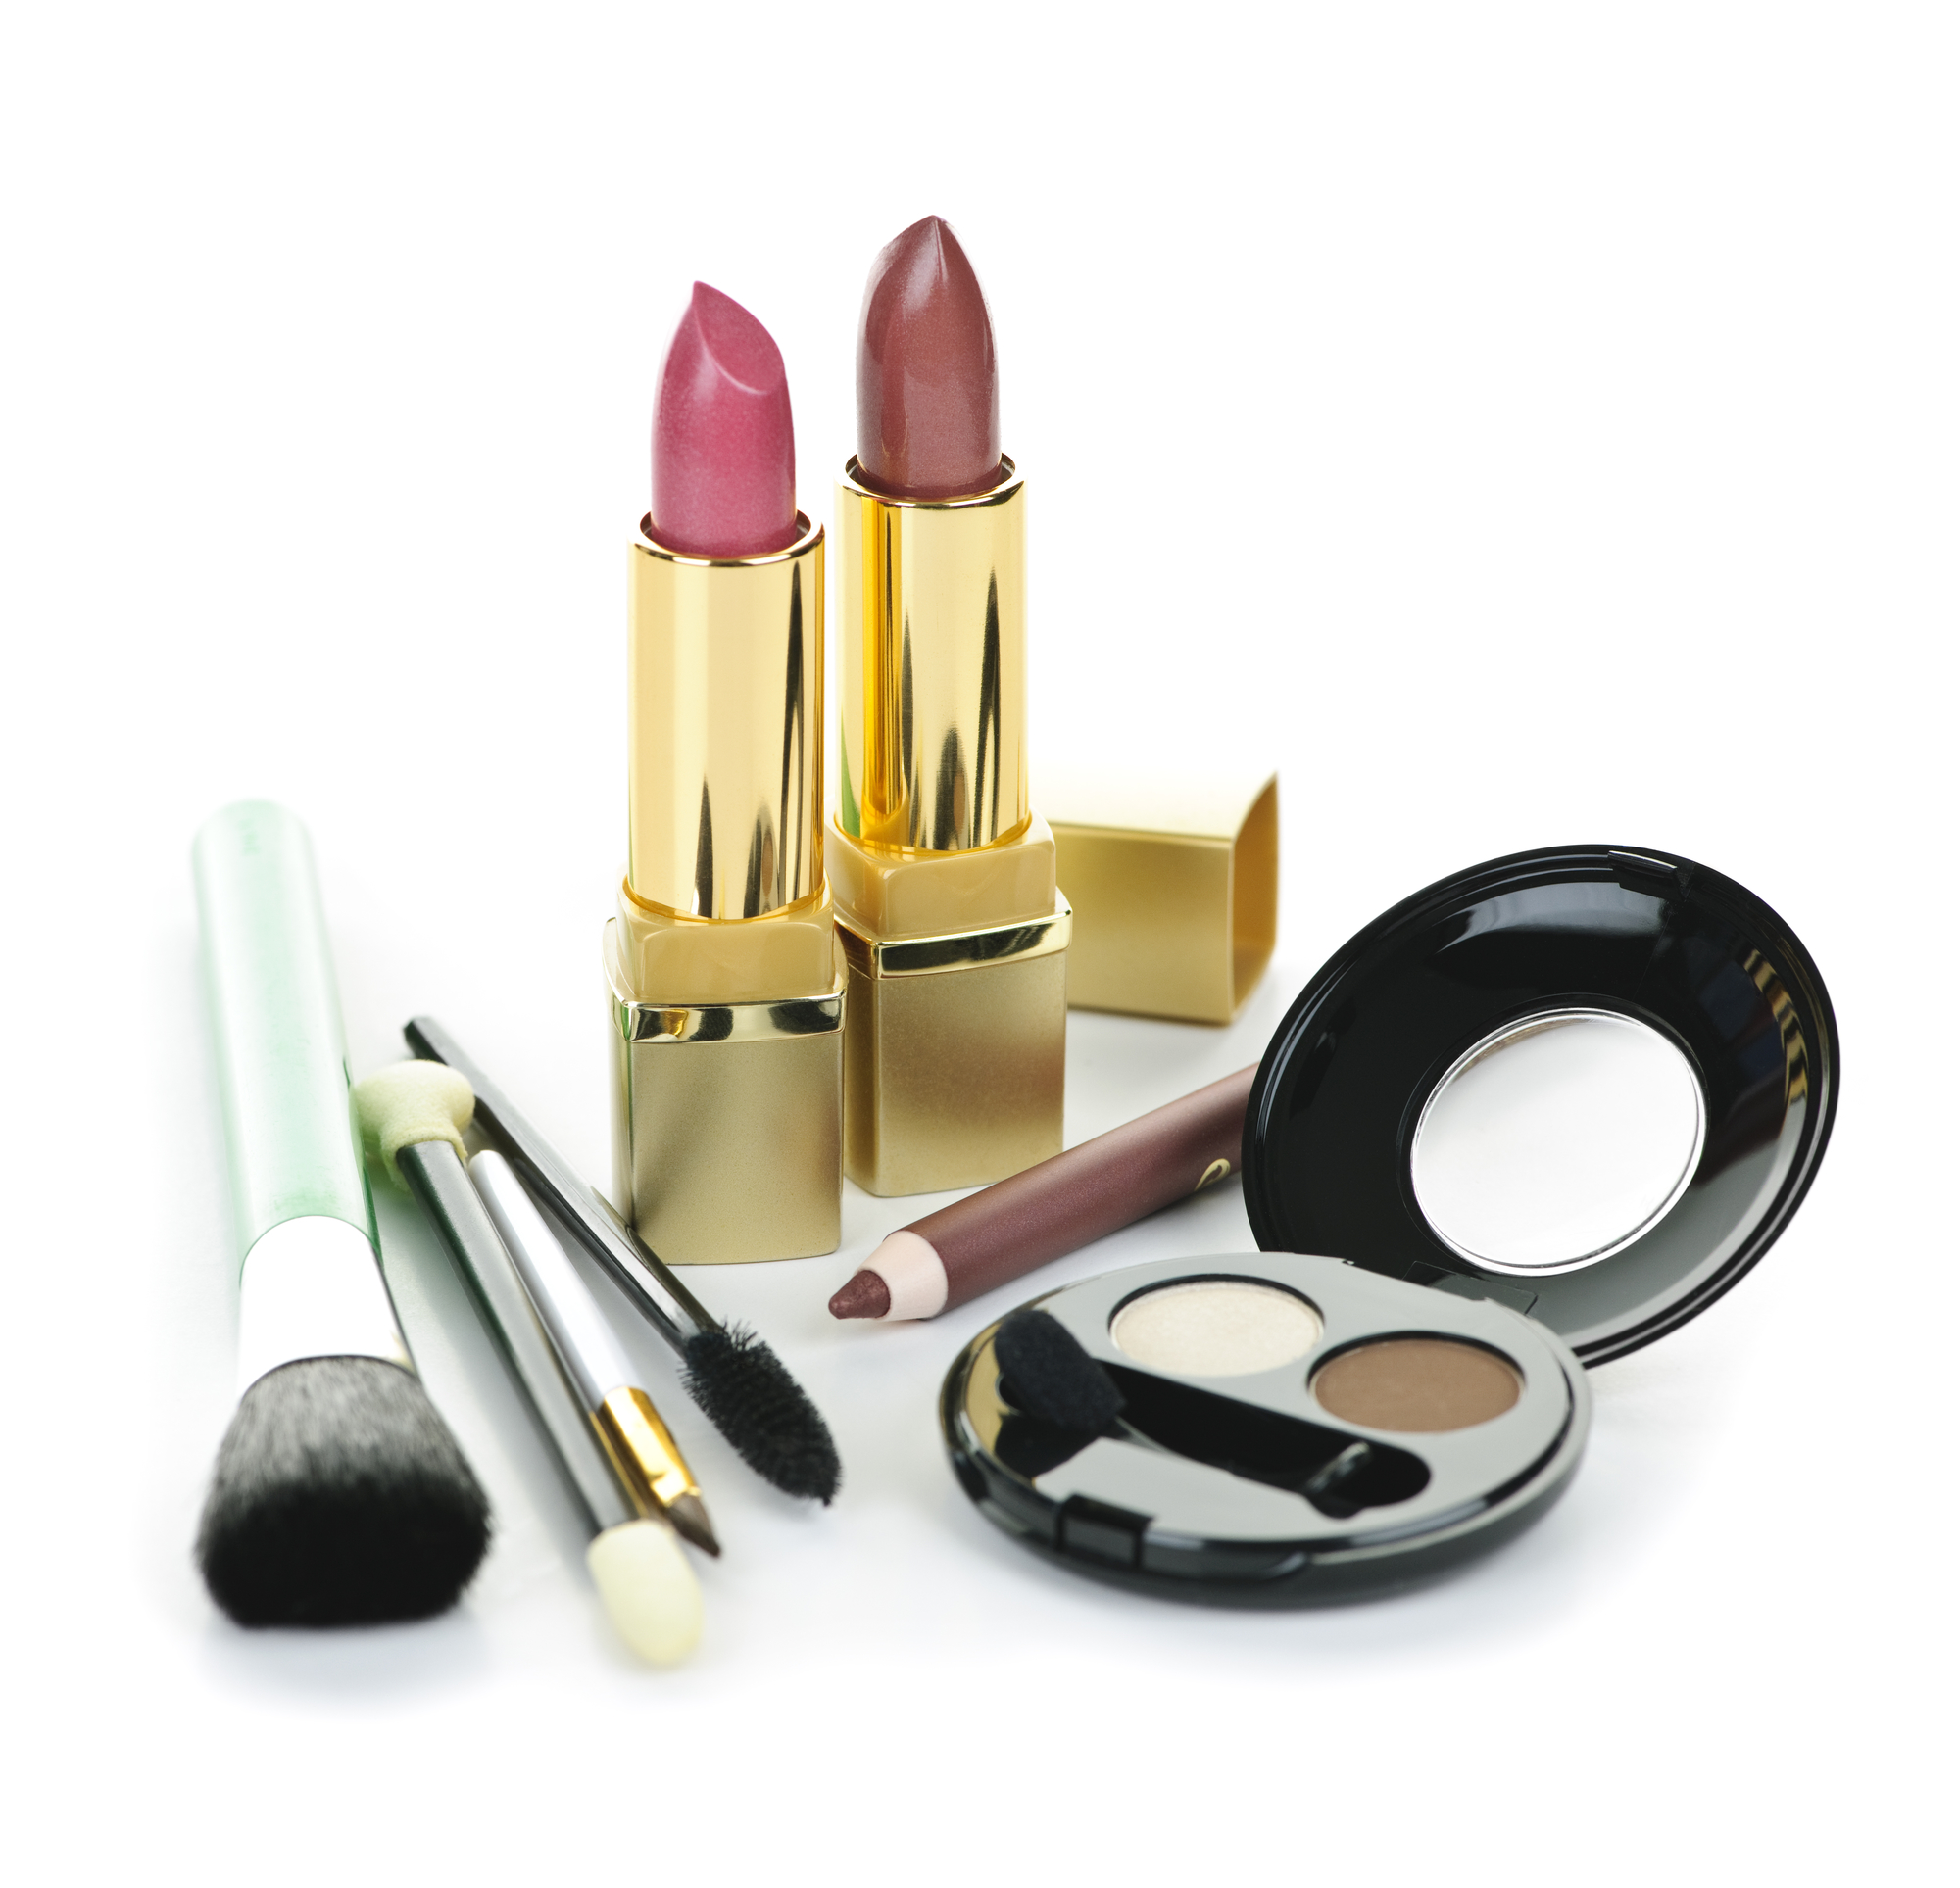 Variety of Make-Up Products